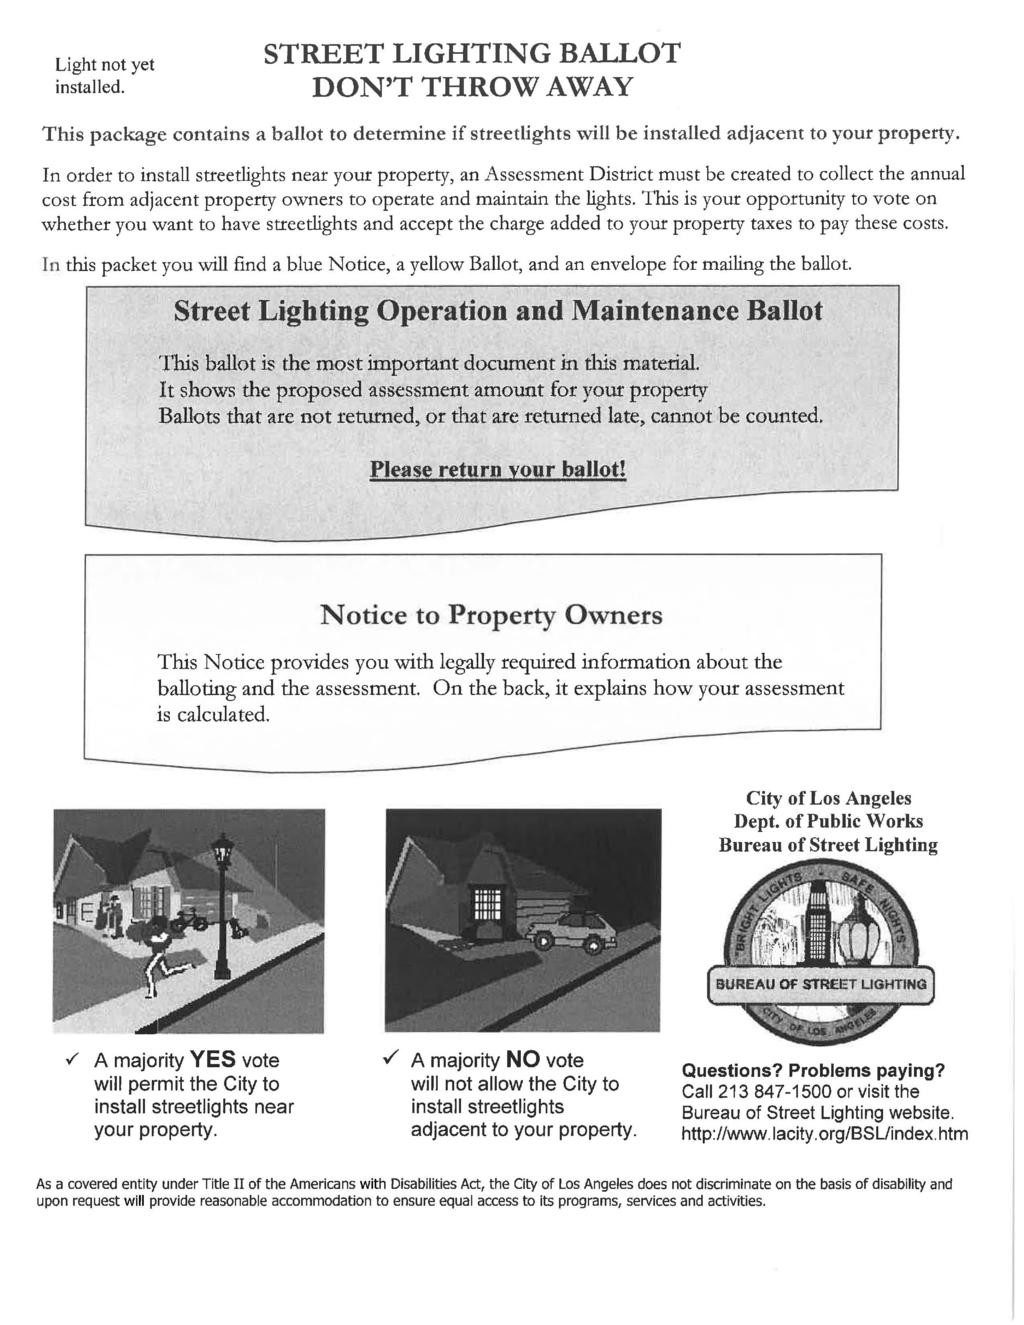 Light not yet installed. STREET LIGHTING BALLOT DON T THROW AWAY This package contains a ballot to determine if streetlights will be installed adjacent to your property.